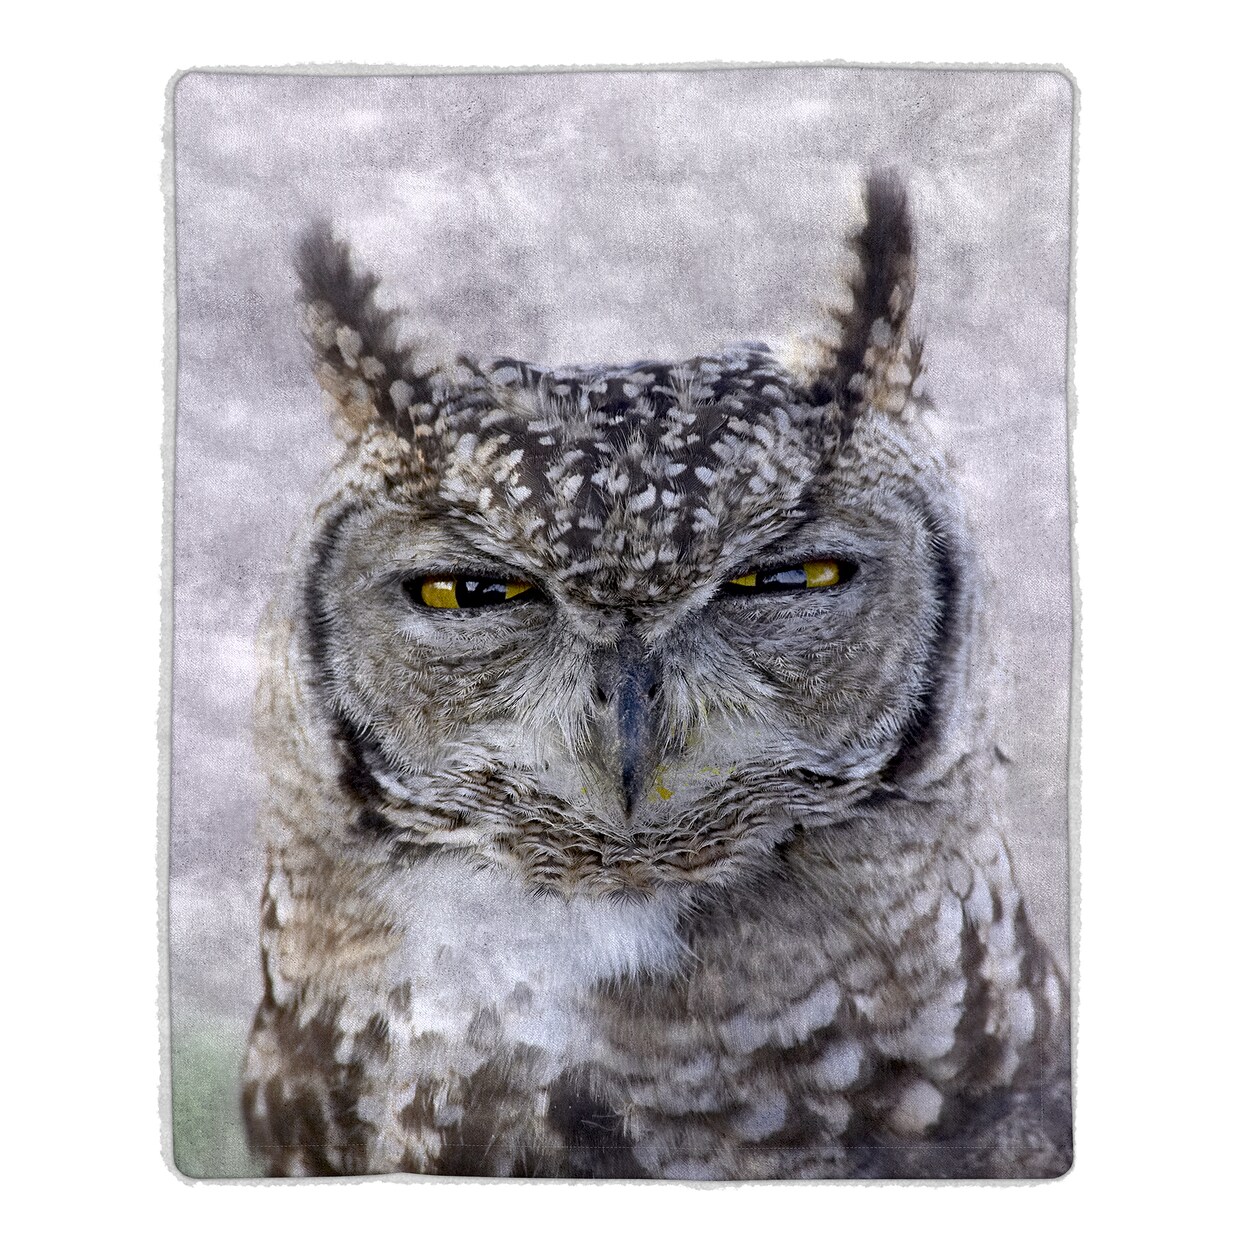 Lavish Home Sherpa Fleece Throw Blanket- Owl Print Lightweight Bed or Couch Soft Snuggly